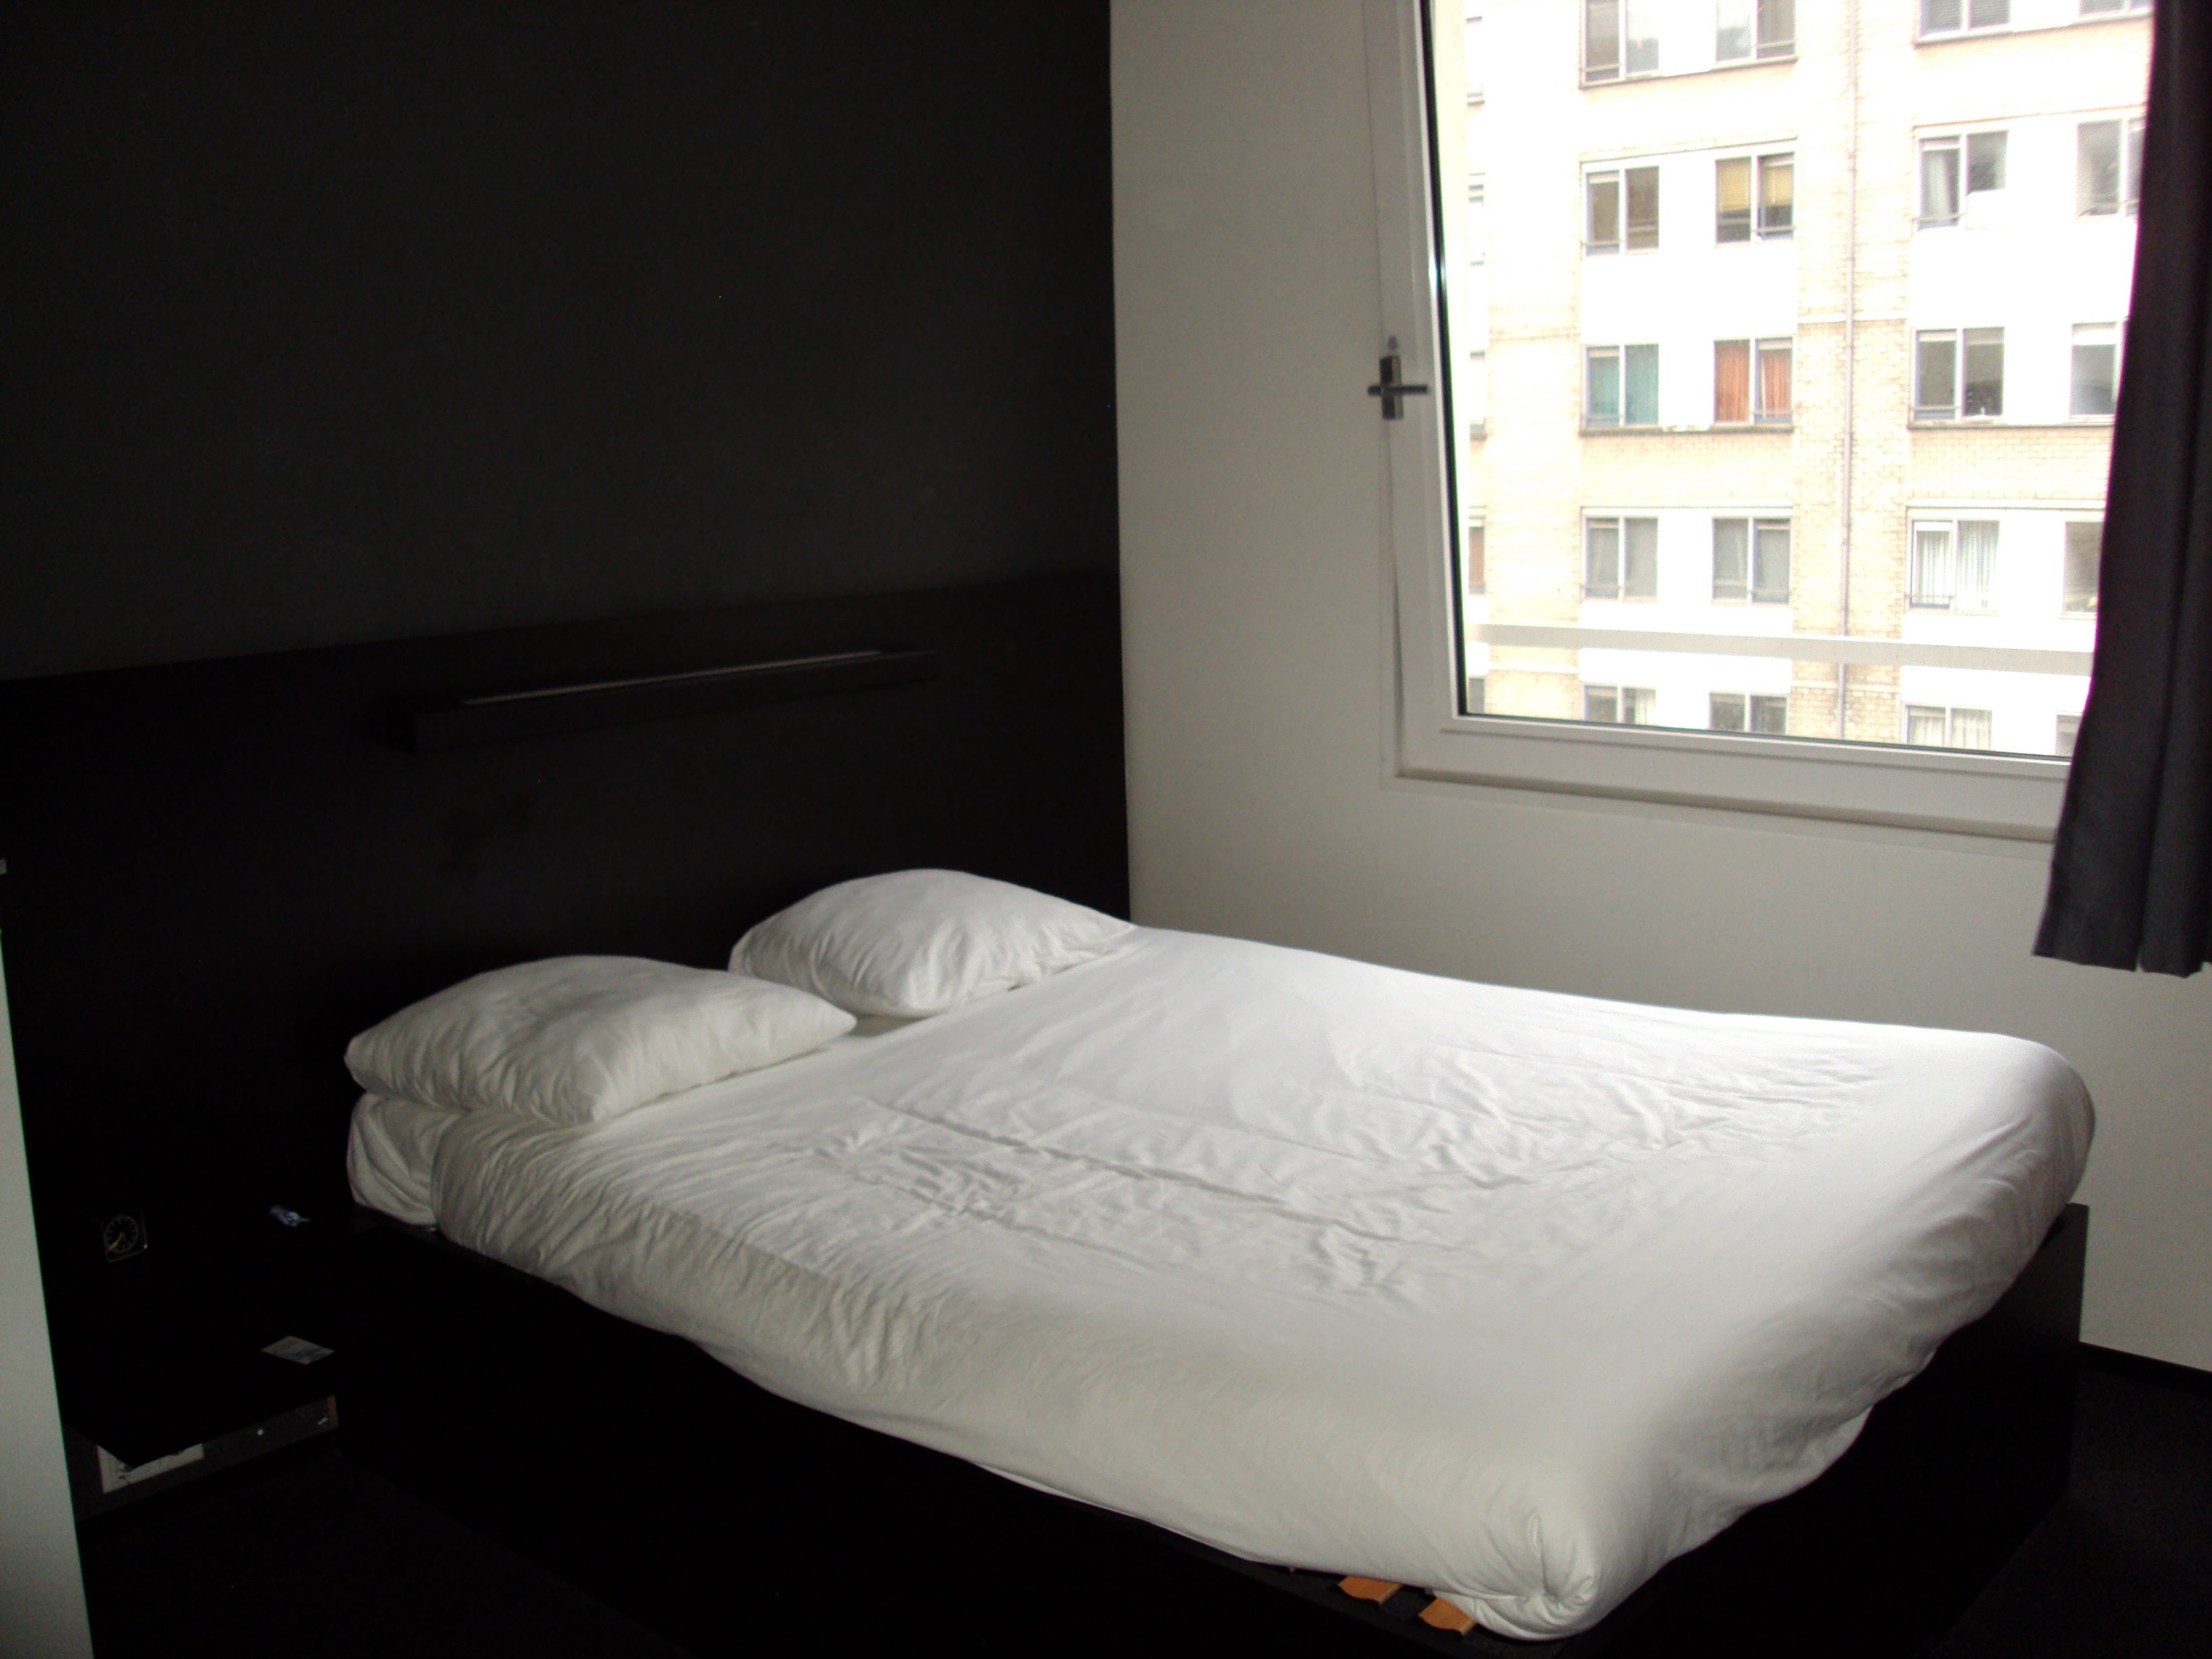 Bedroom at the Student Hotel in Rotterdam